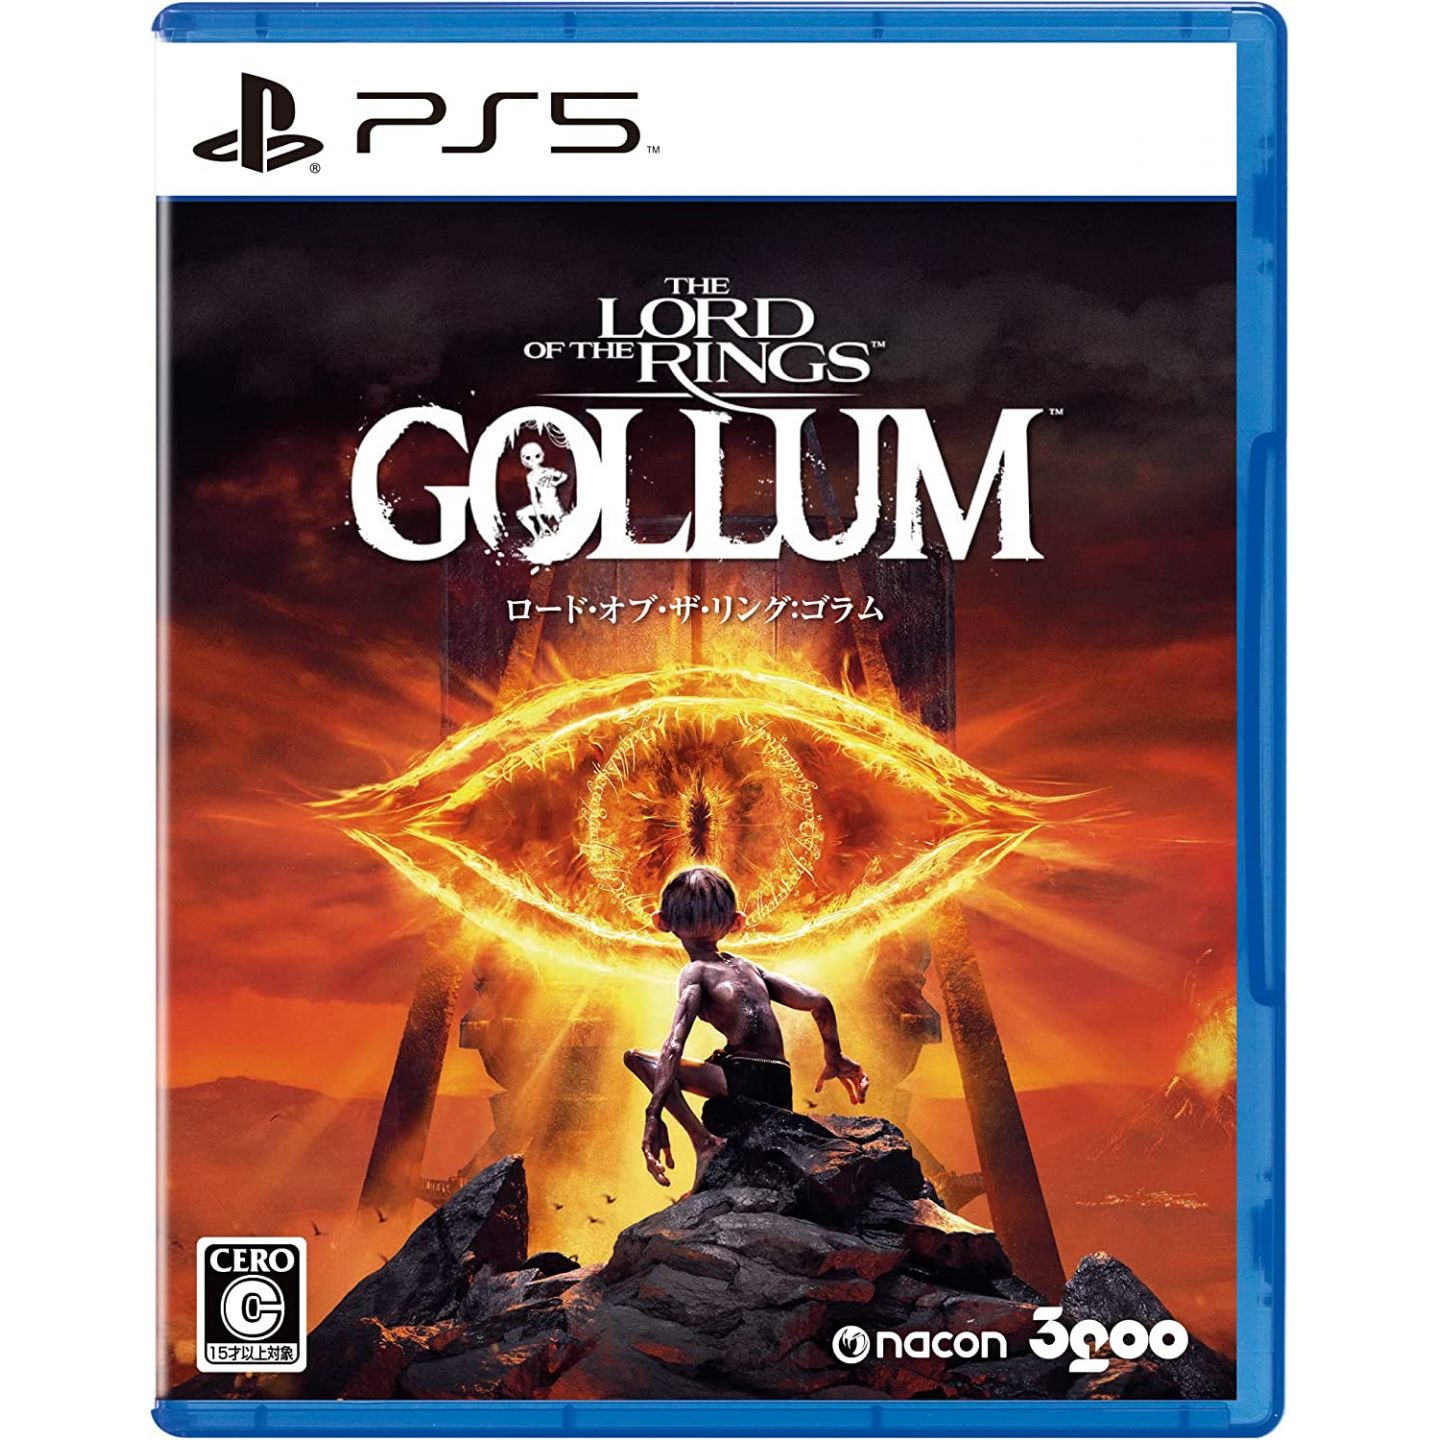 The Lord of the Rings - Gollum, Sony Playstation 5